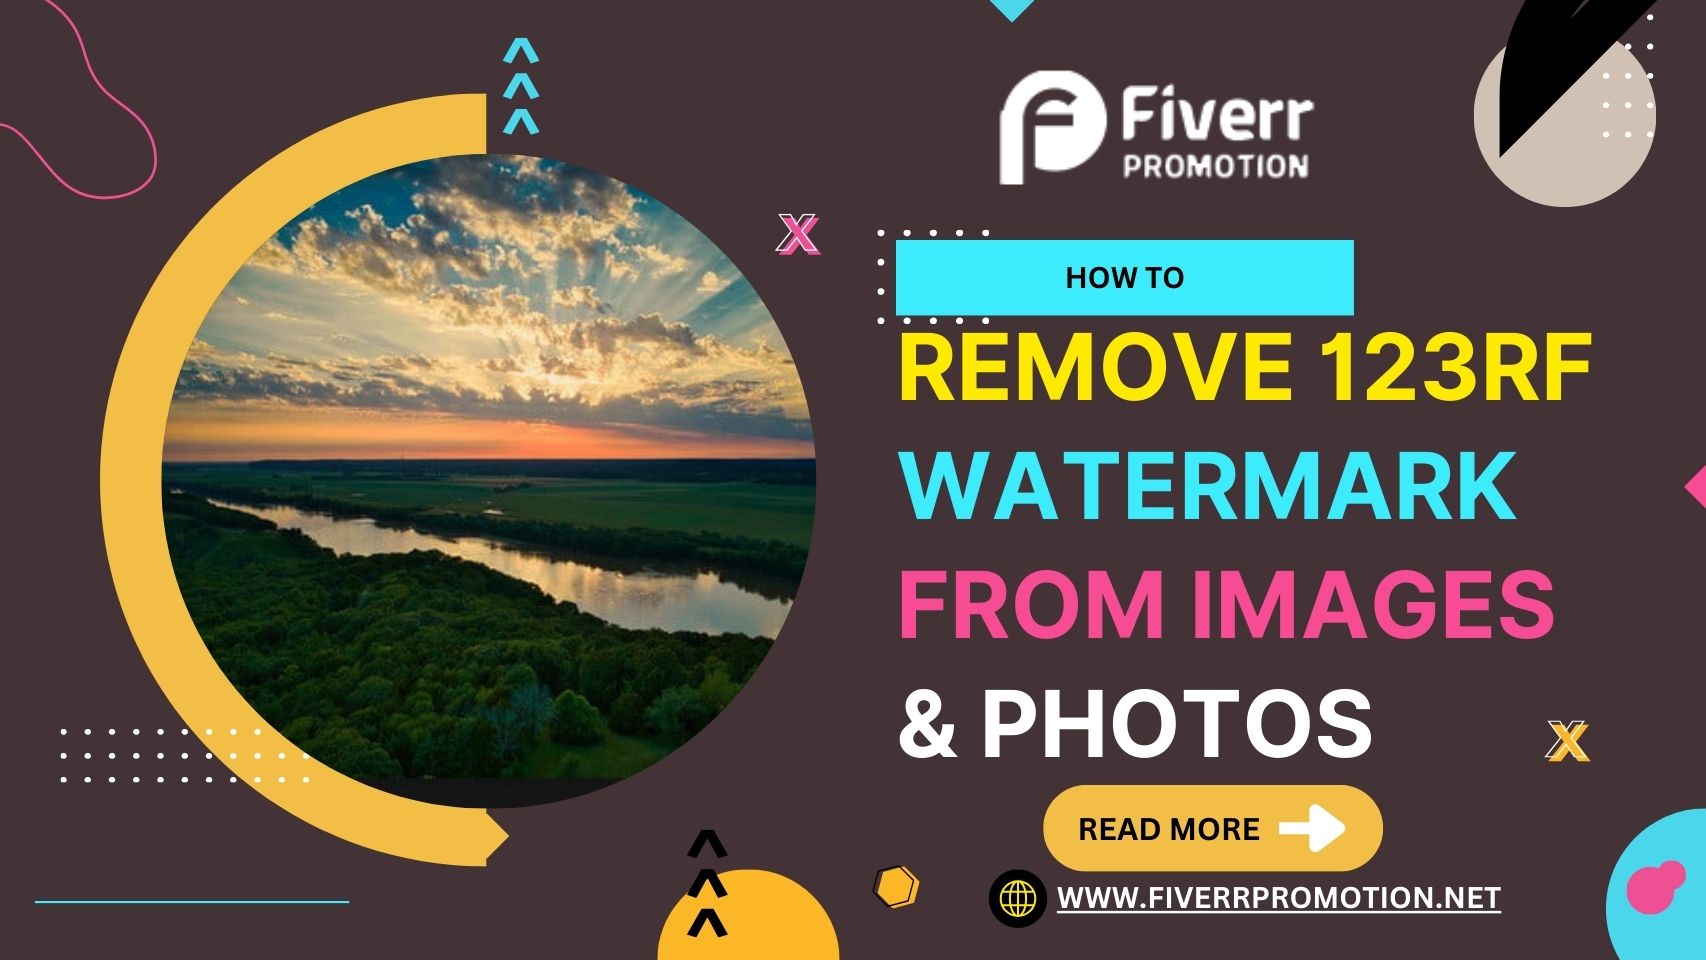 How to Remove 123RF Watermark from Images & Photos